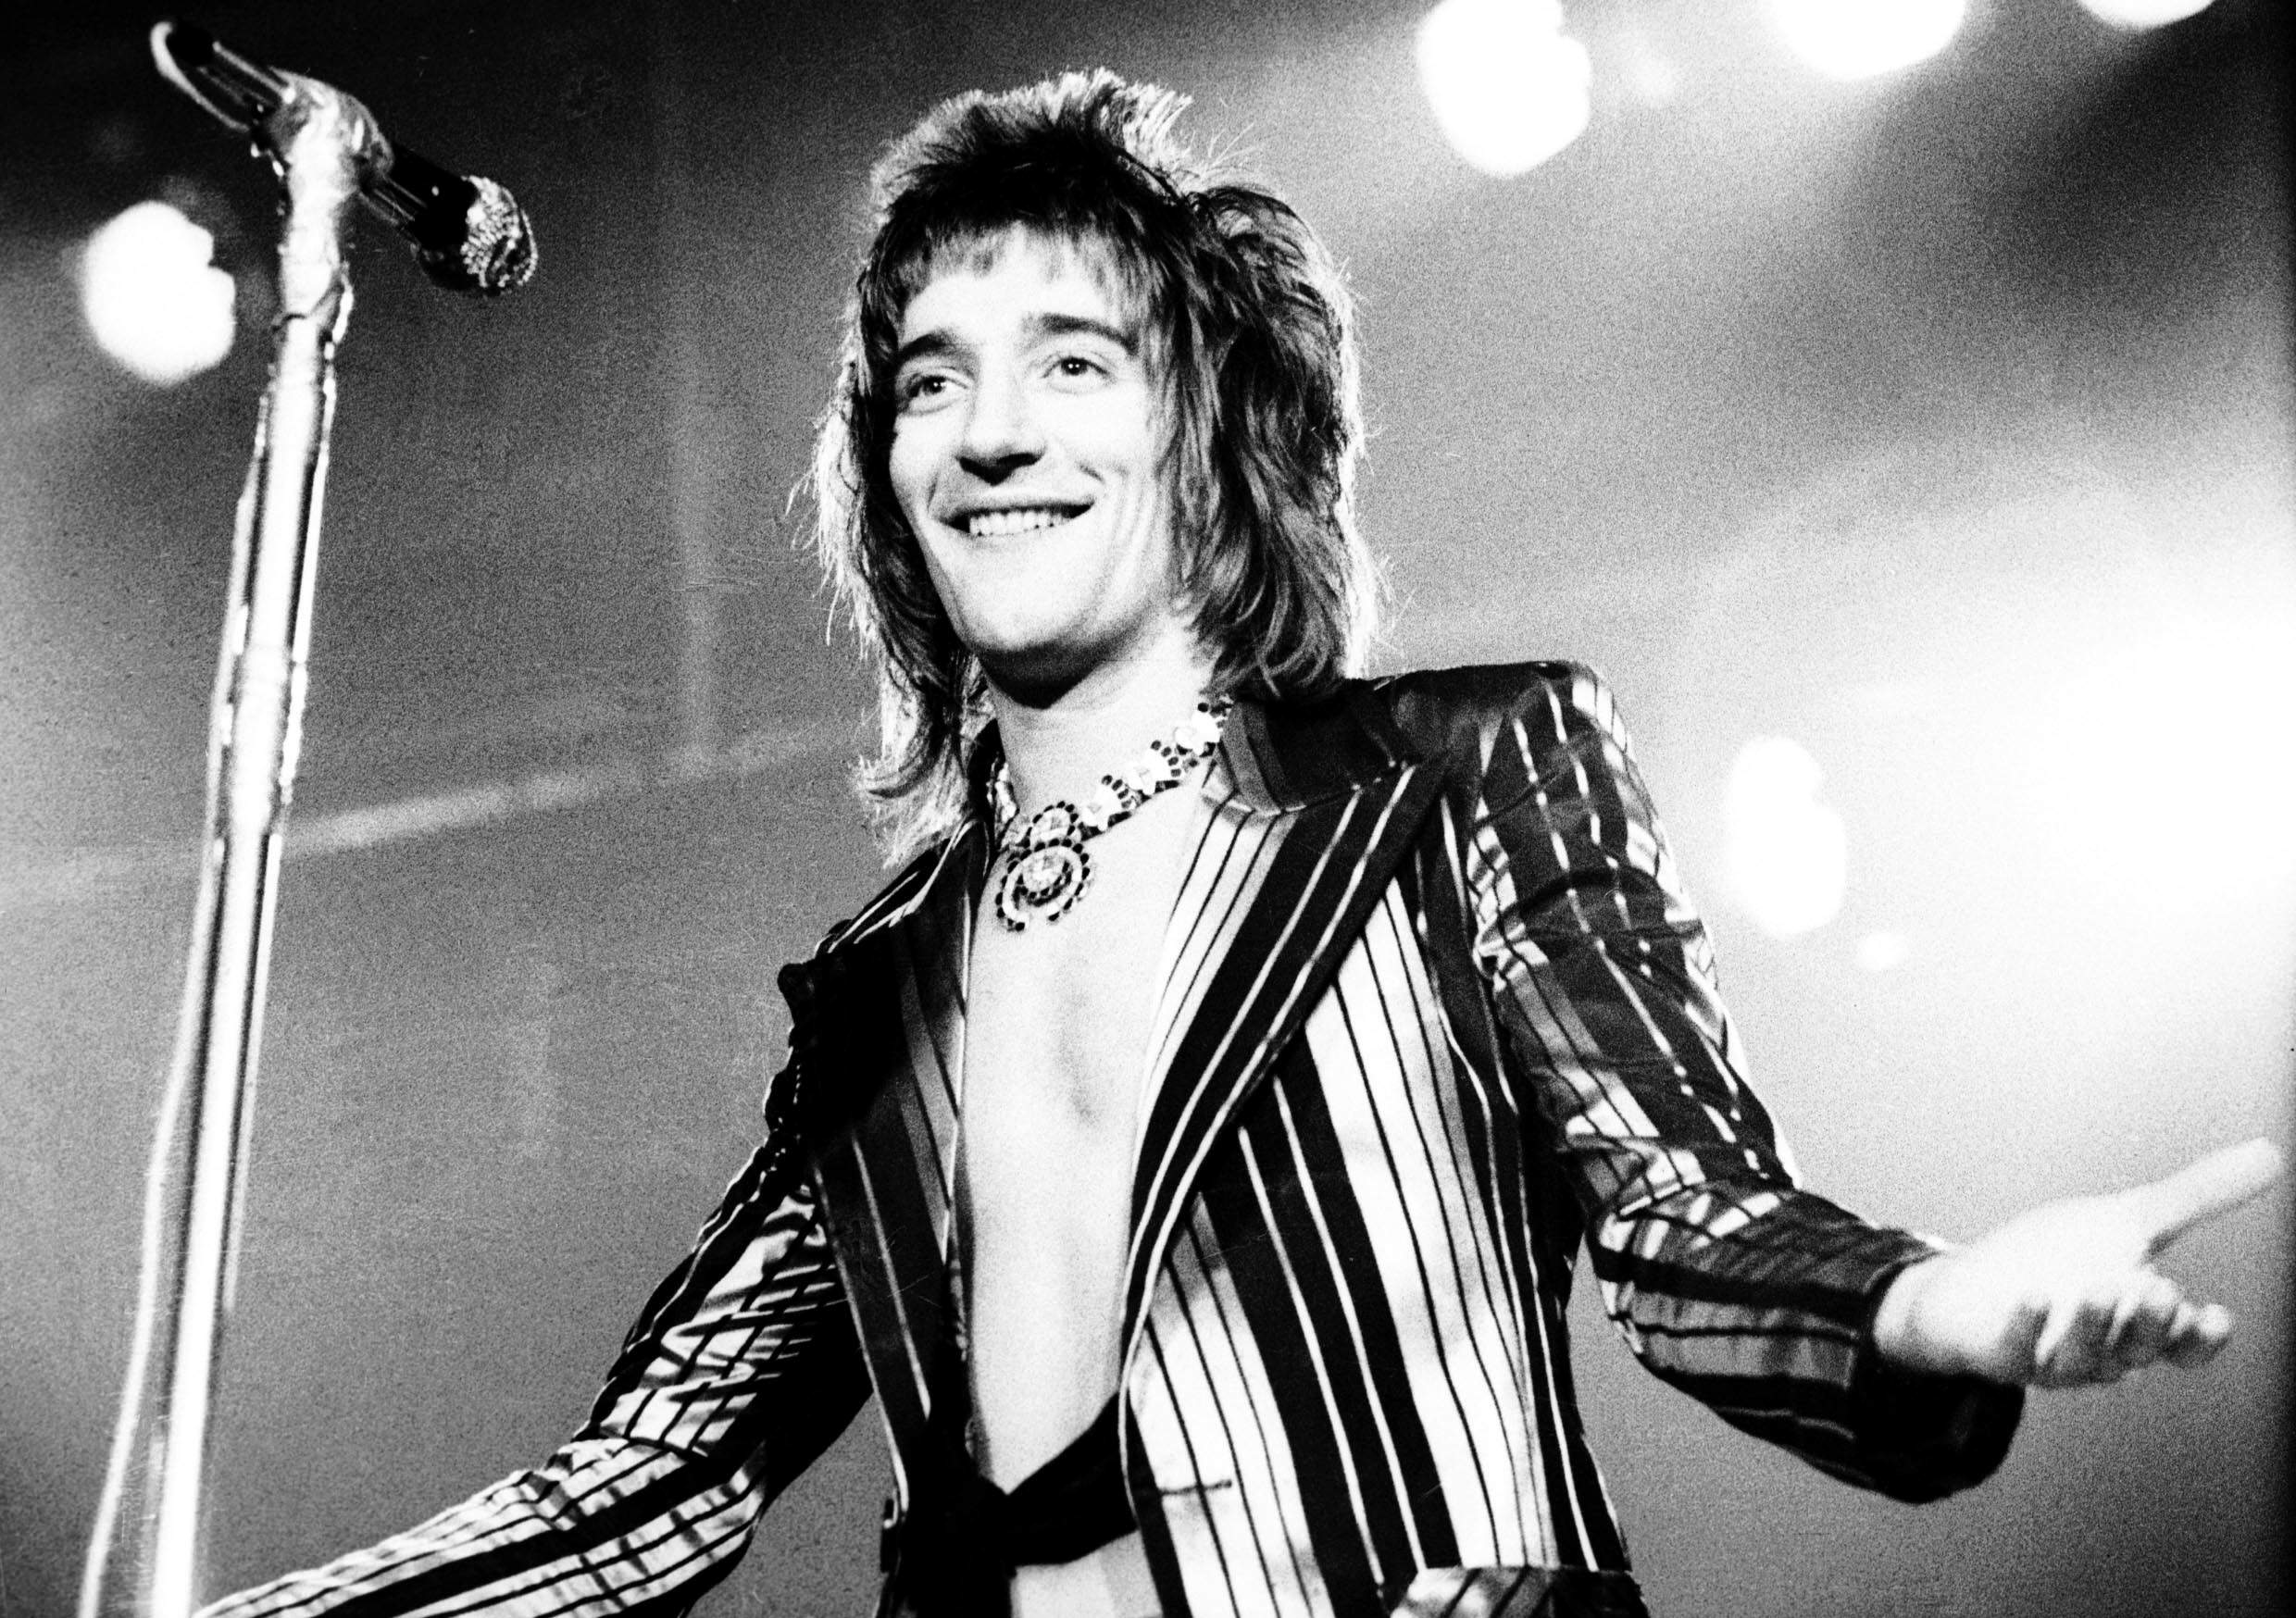 Rod Stewart with a microphone